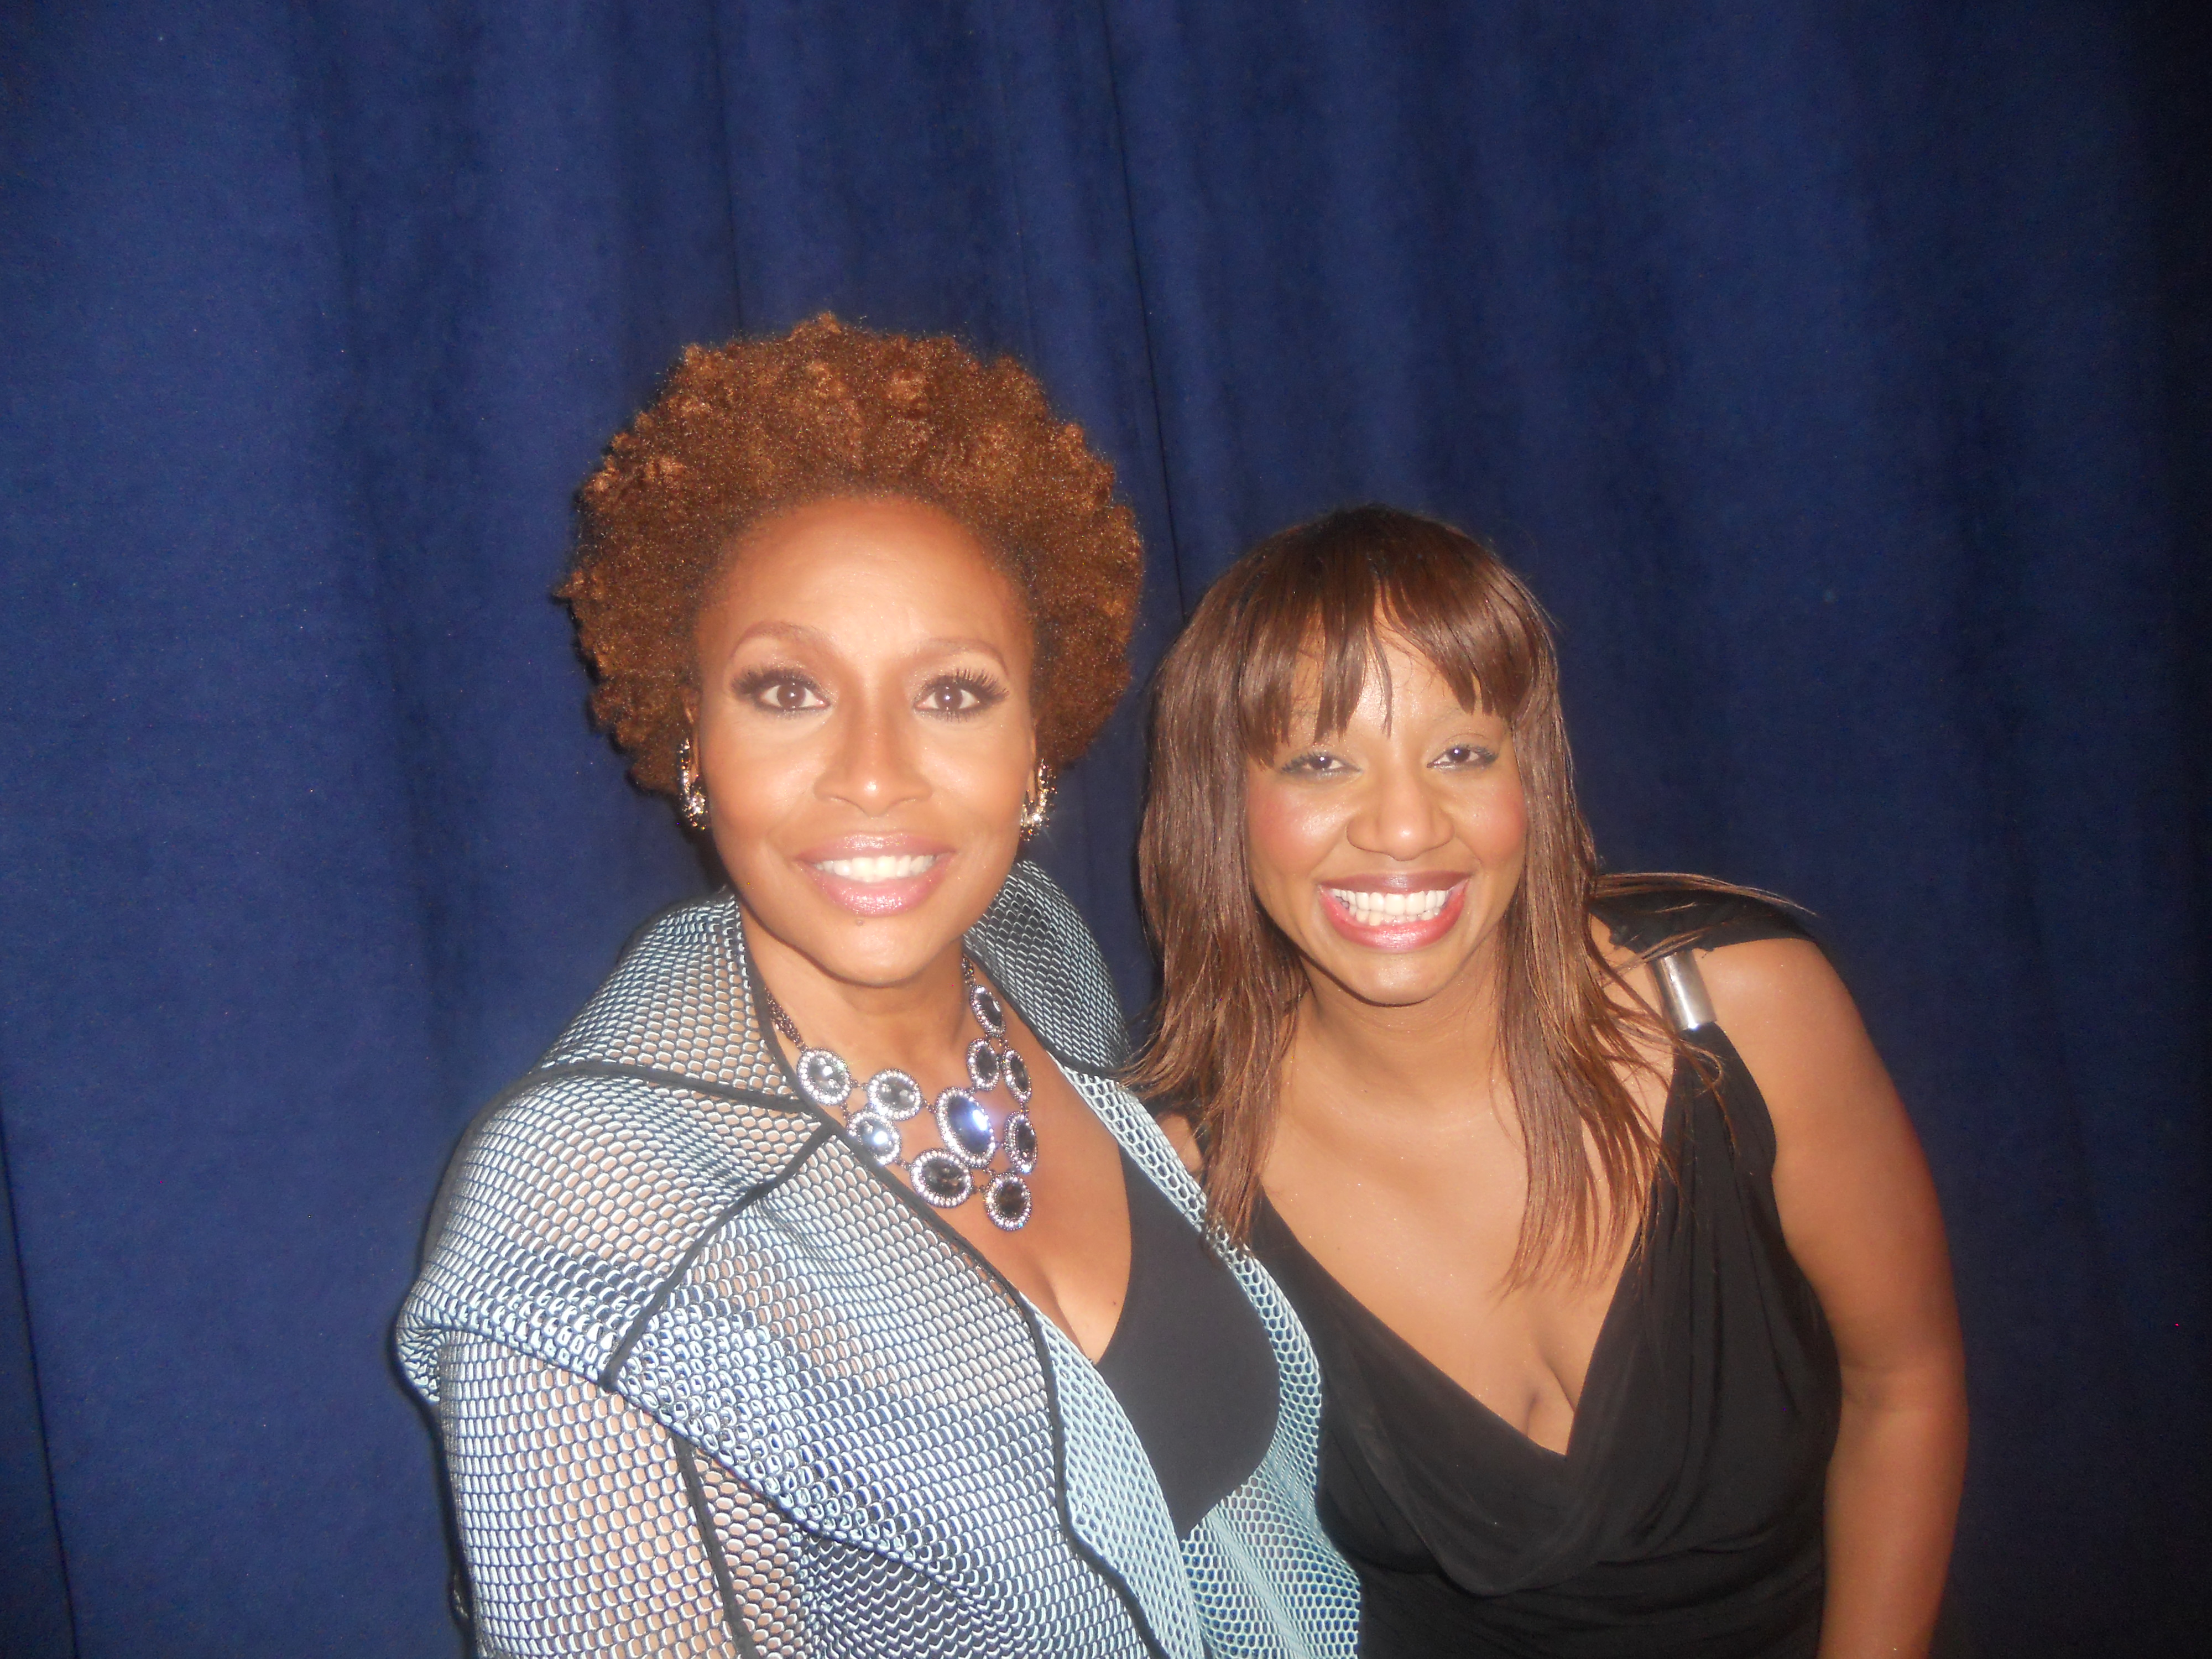 Nicole takes photo with legendary actress Jennifer Lewis at the American Black Film festival in NYC